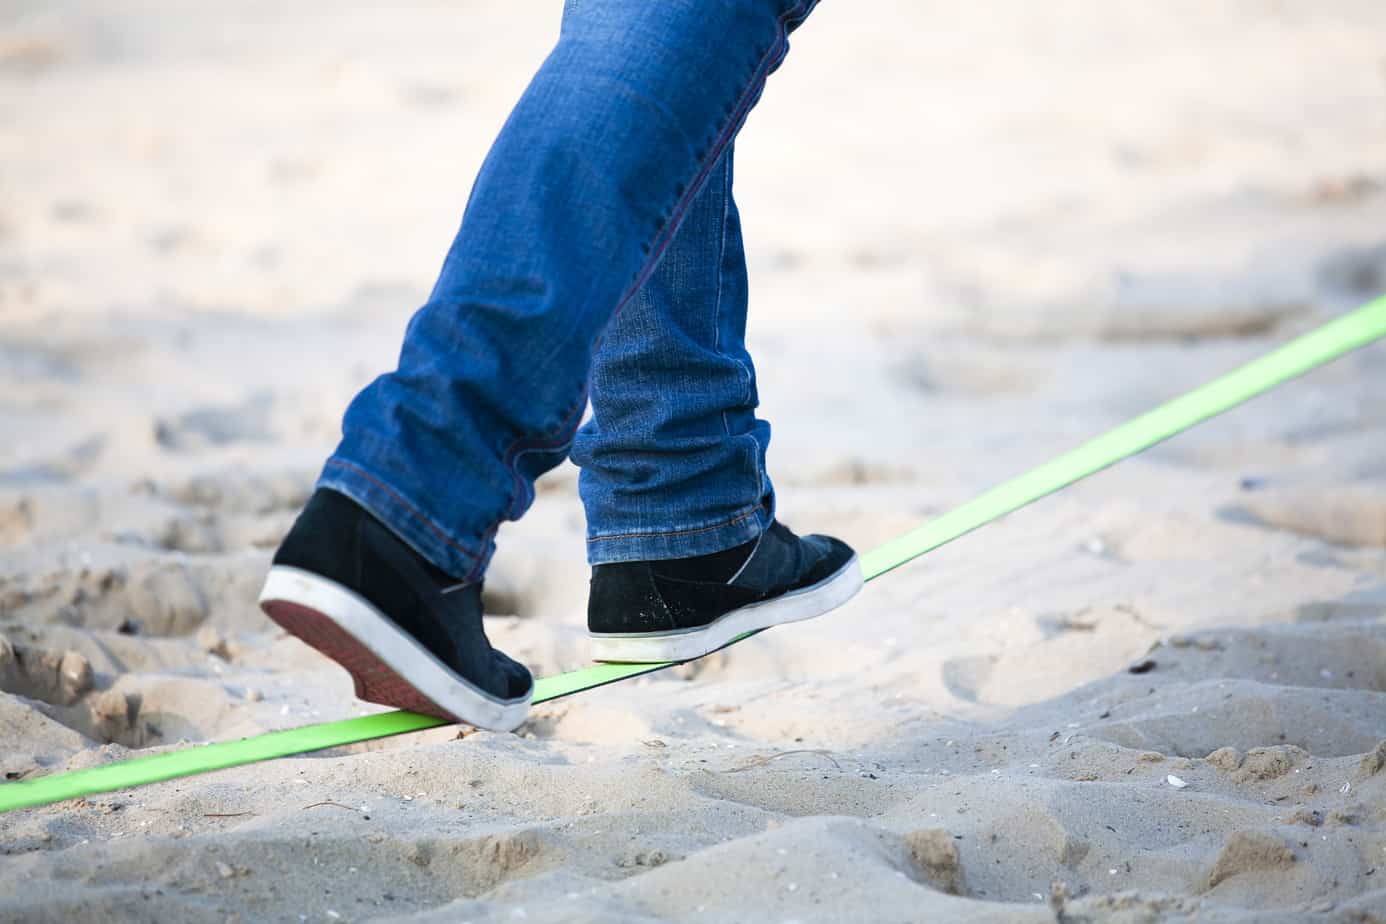 What Are The Best Shoes For Slacklining?